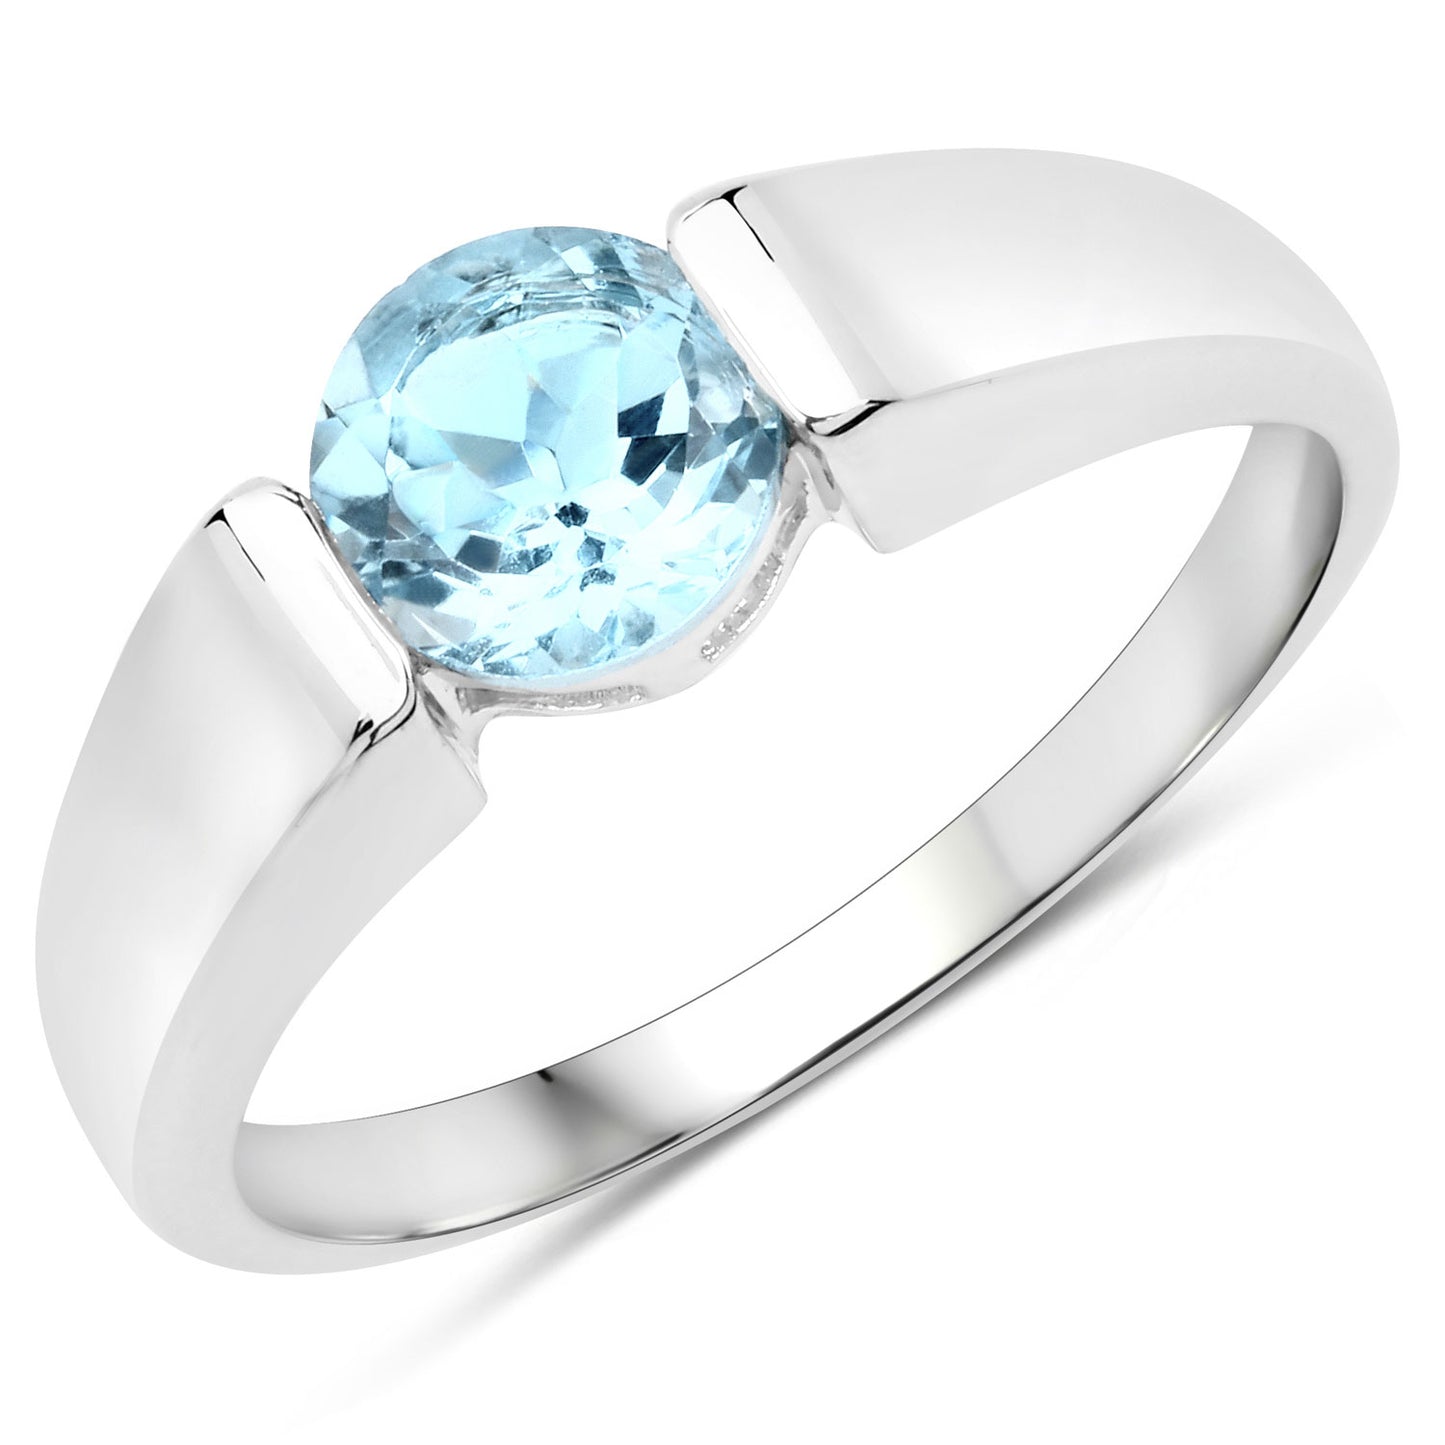 Sterling Silver 1.05 Carat Genuine Blue Topaz Solitaire Ring fine